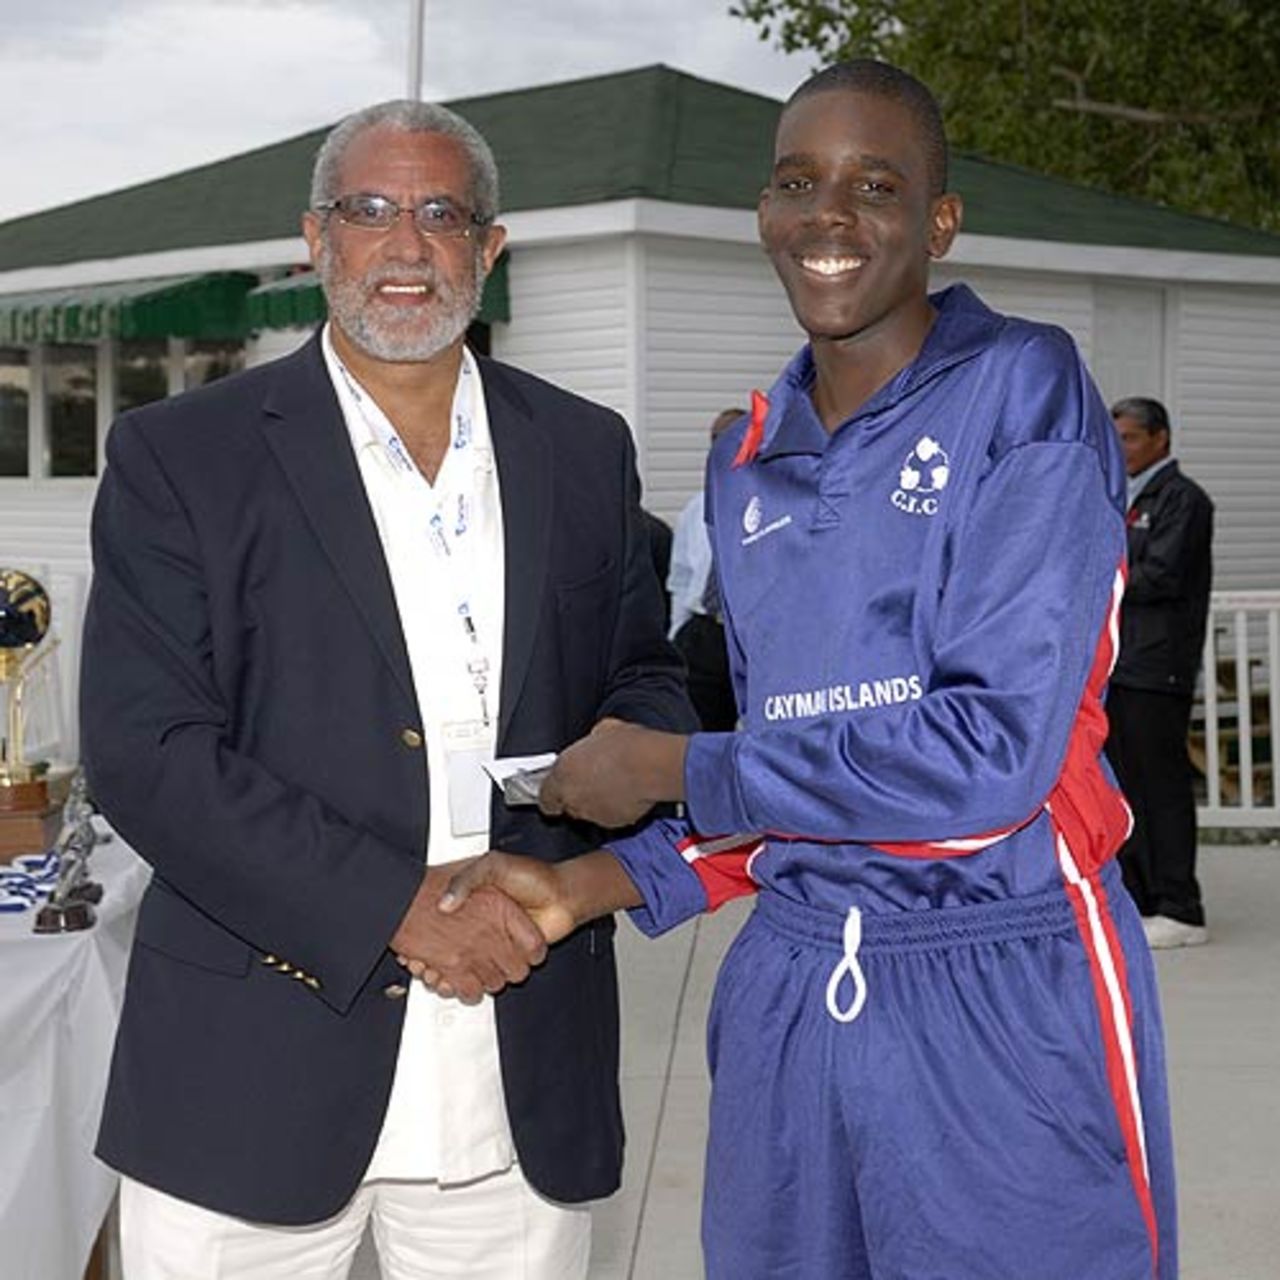 Ramon Sealy of Cayman Islands receives the Player-of-the-Tournament award from Hon. KR (Randy) Horton, Minister for Sports, Bermuda, Under-19 Americas Qualifiers, Toronto, August 19, 2007